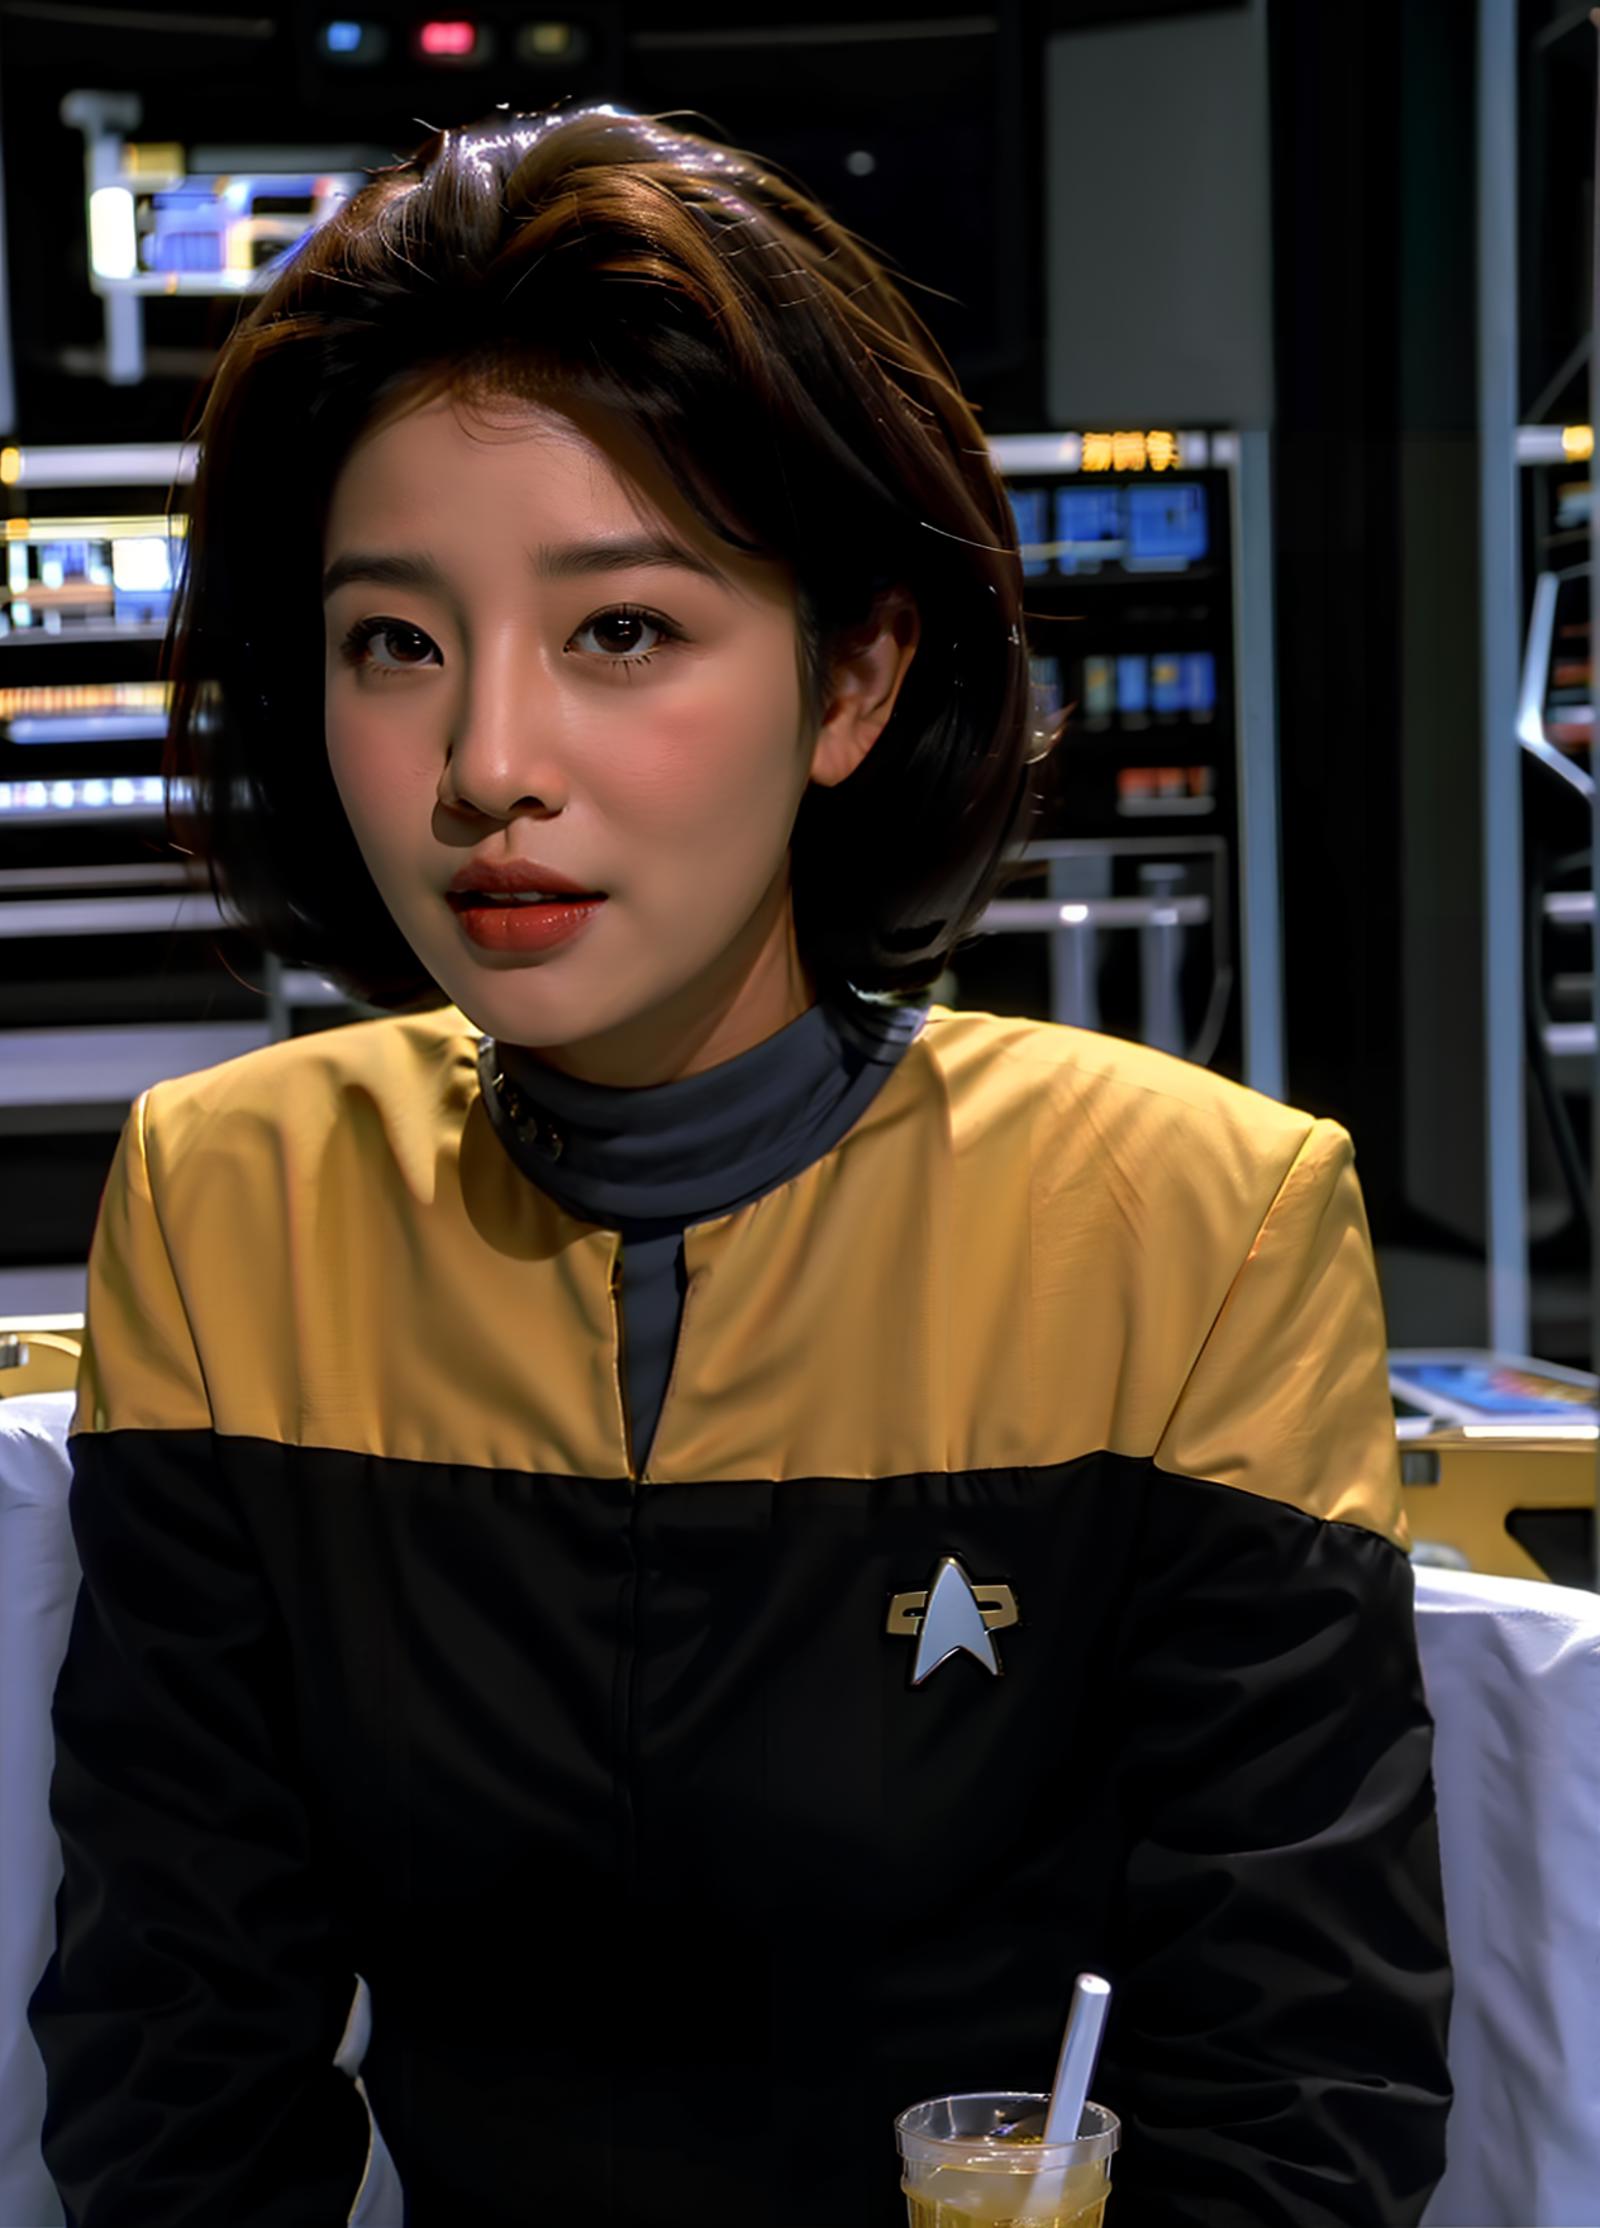 Star Trek Voyager uniforms image by impossiblebearcl4060